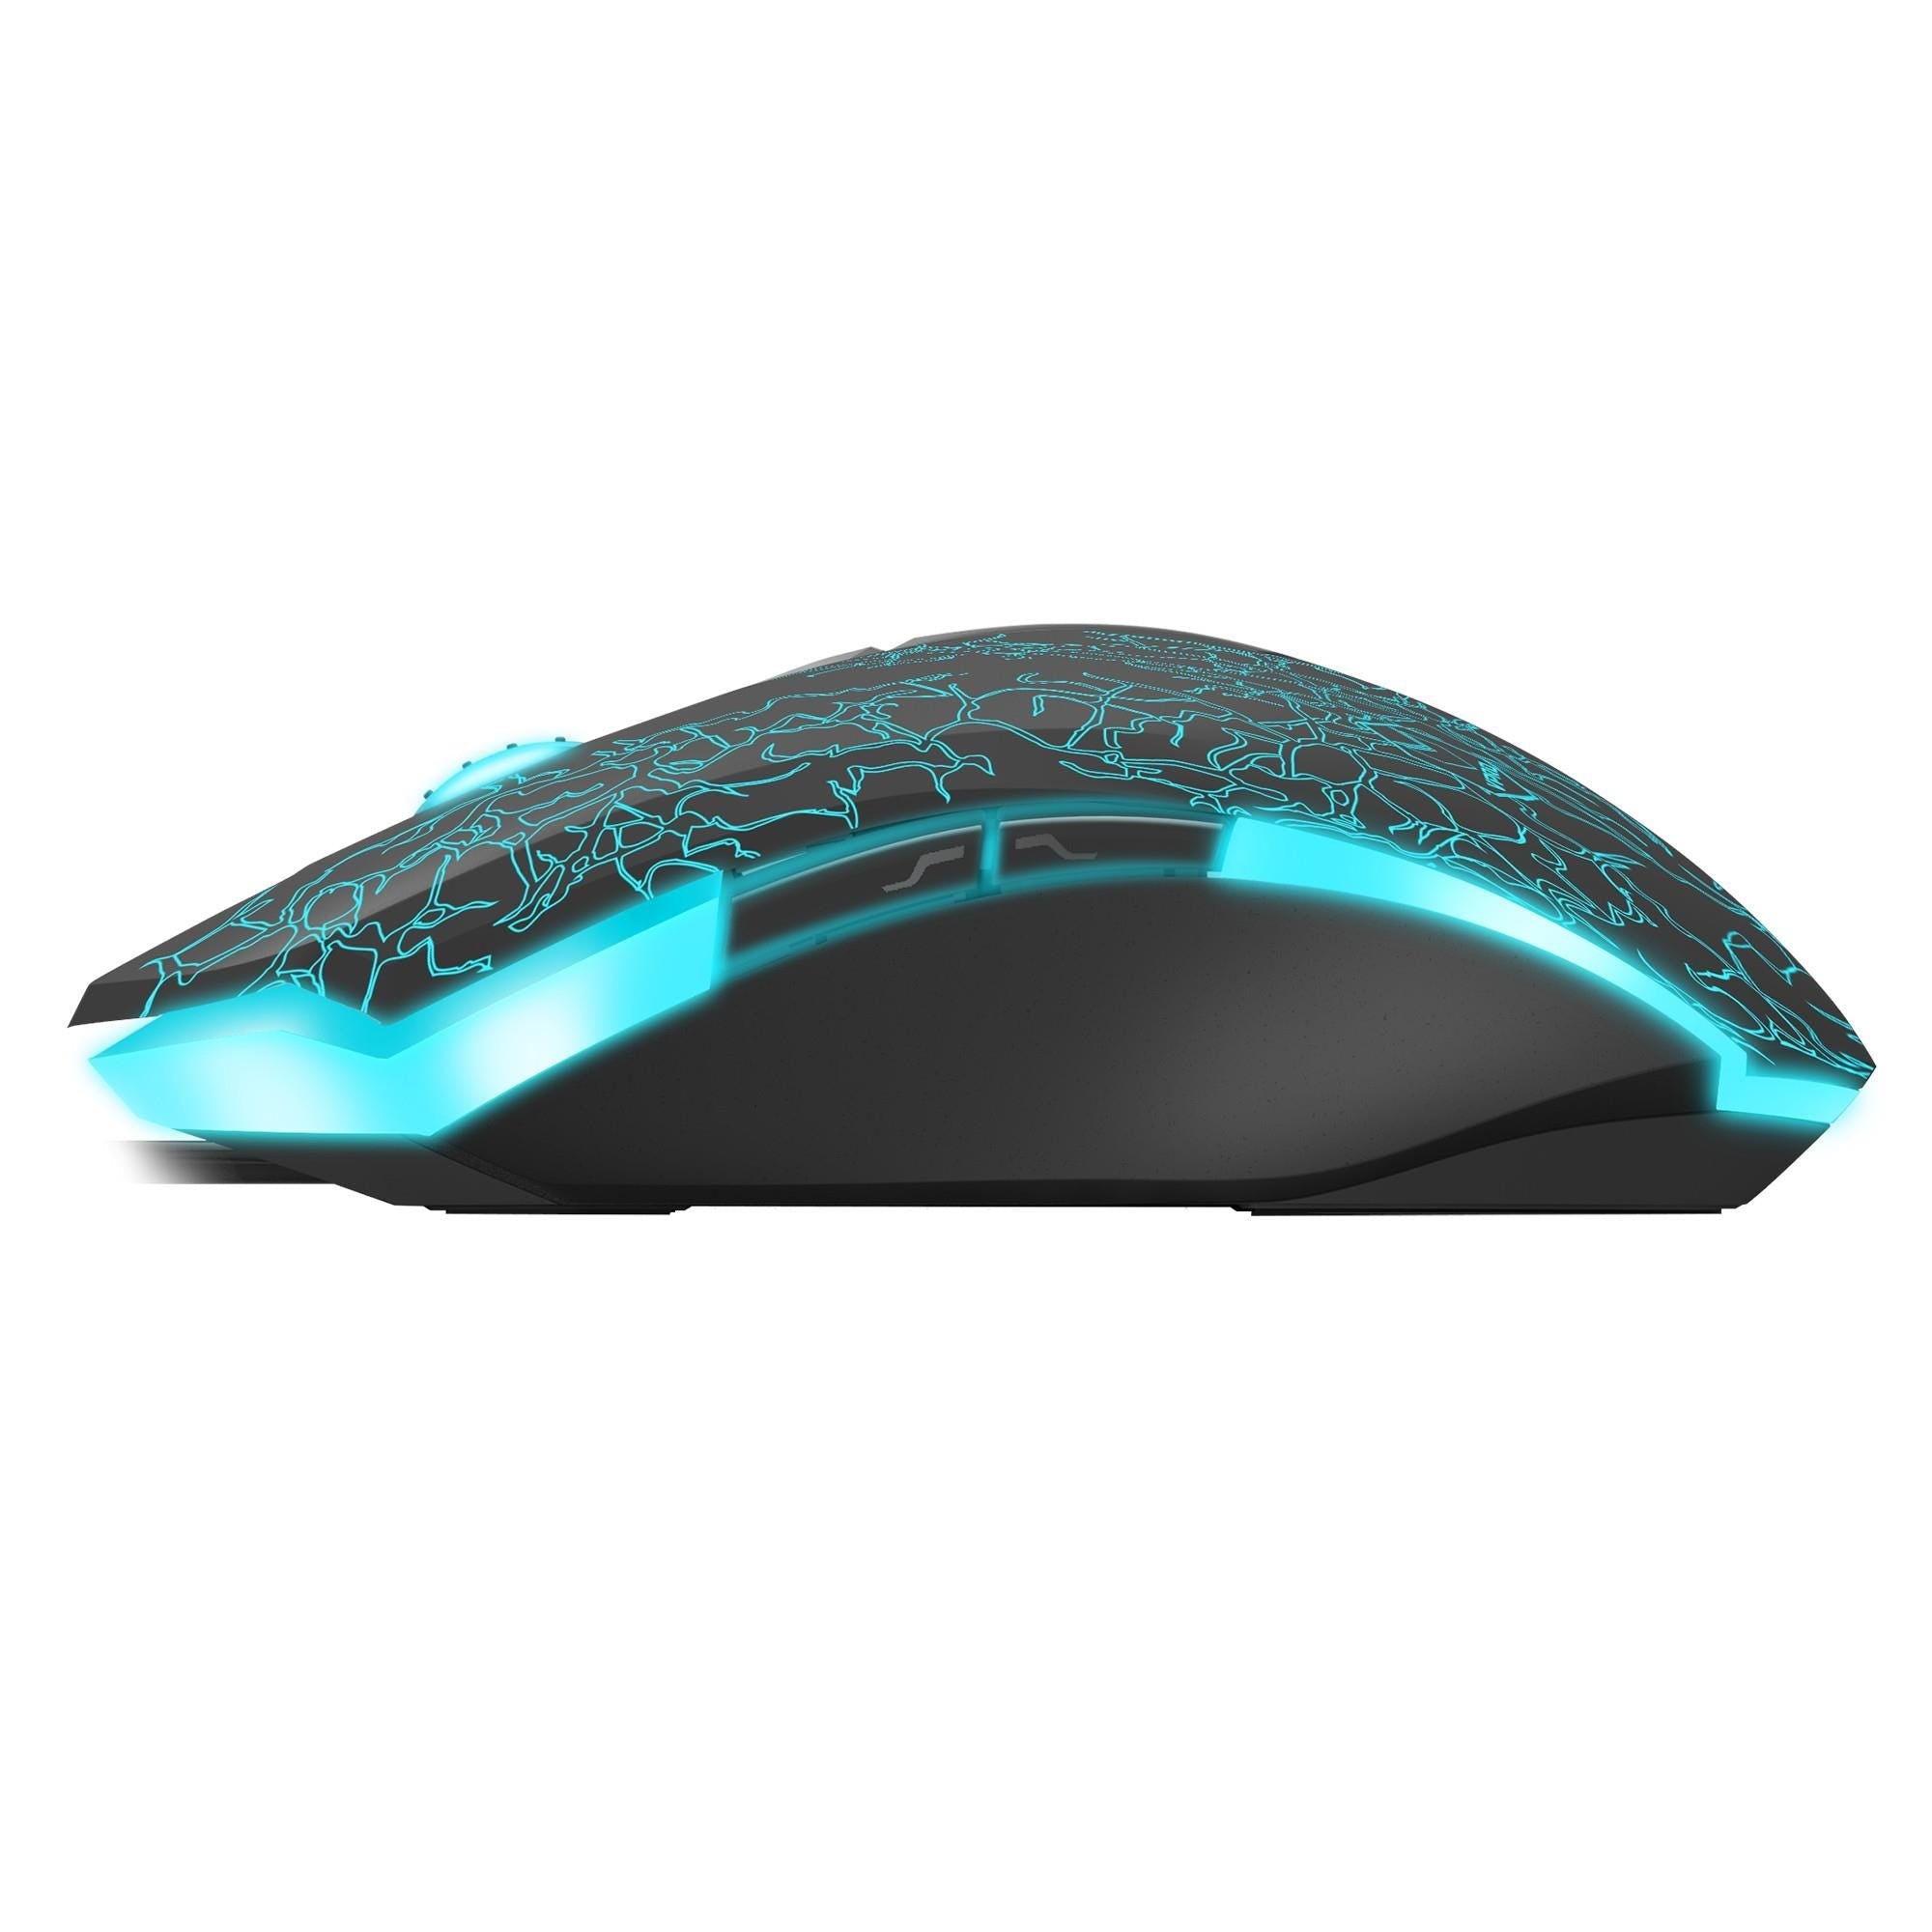 Rapoo V18 Ambidextrous 5-Button Optical Gaming Mouse - Black - New